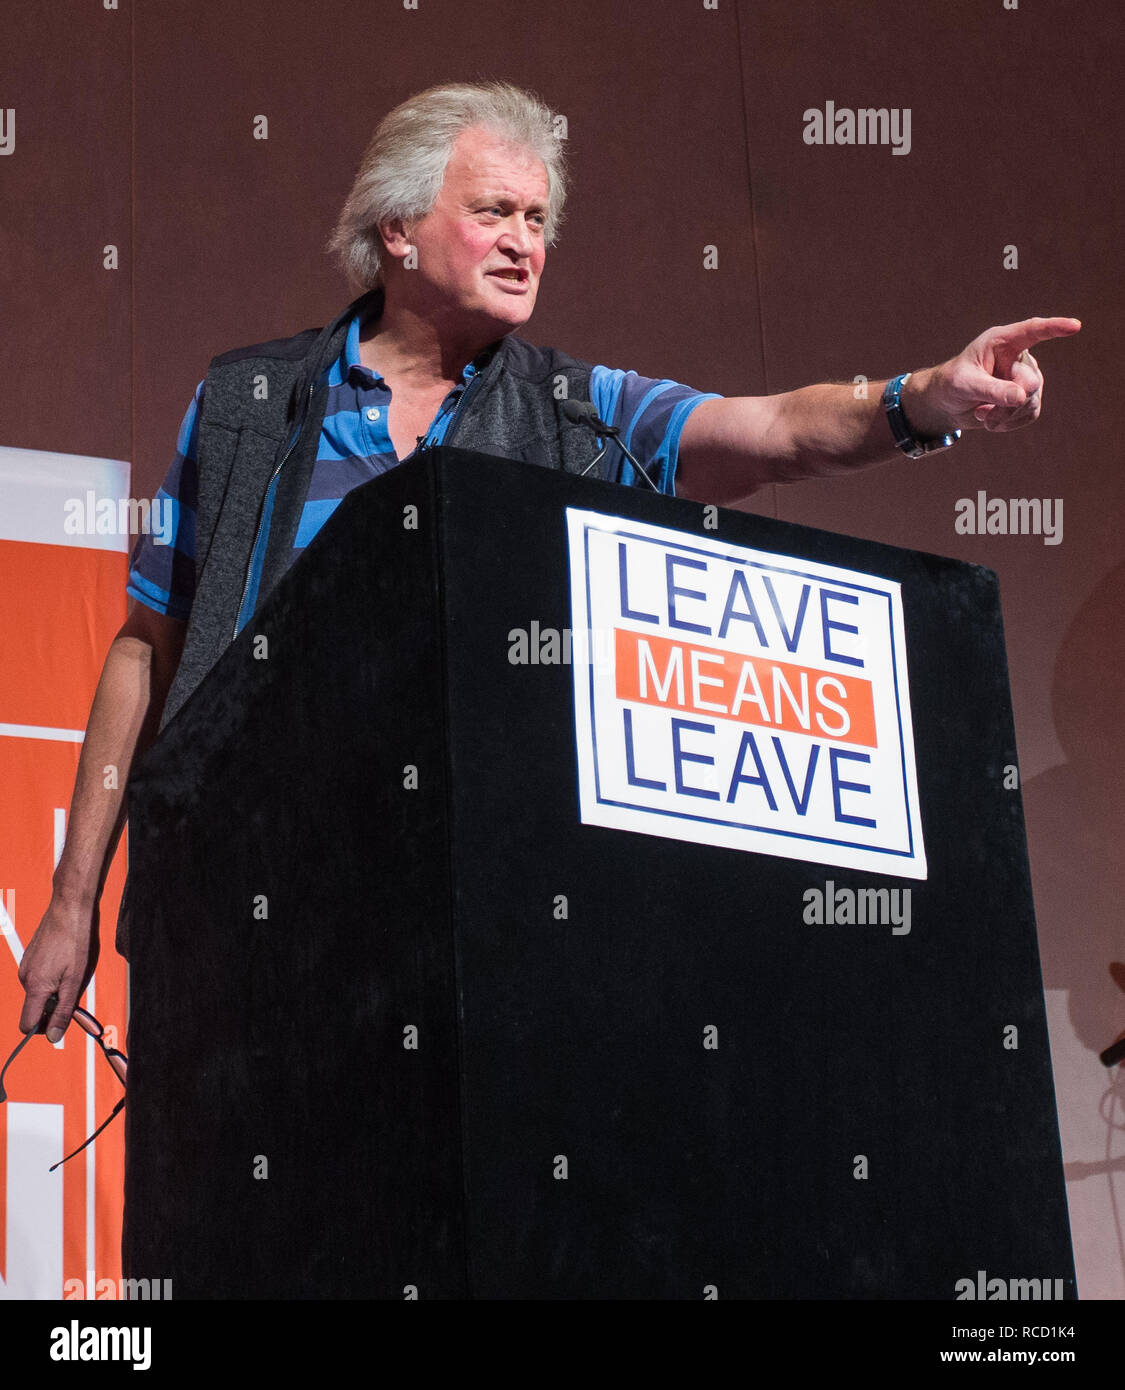 'Leave Means Leave' rally held at Queen Elizabeth II Conference Centre  Featuring: Tim Martin Where: London, United Kingdom When: 14 Dec 2018 Credit: Wheatley/WENN Stock Photo